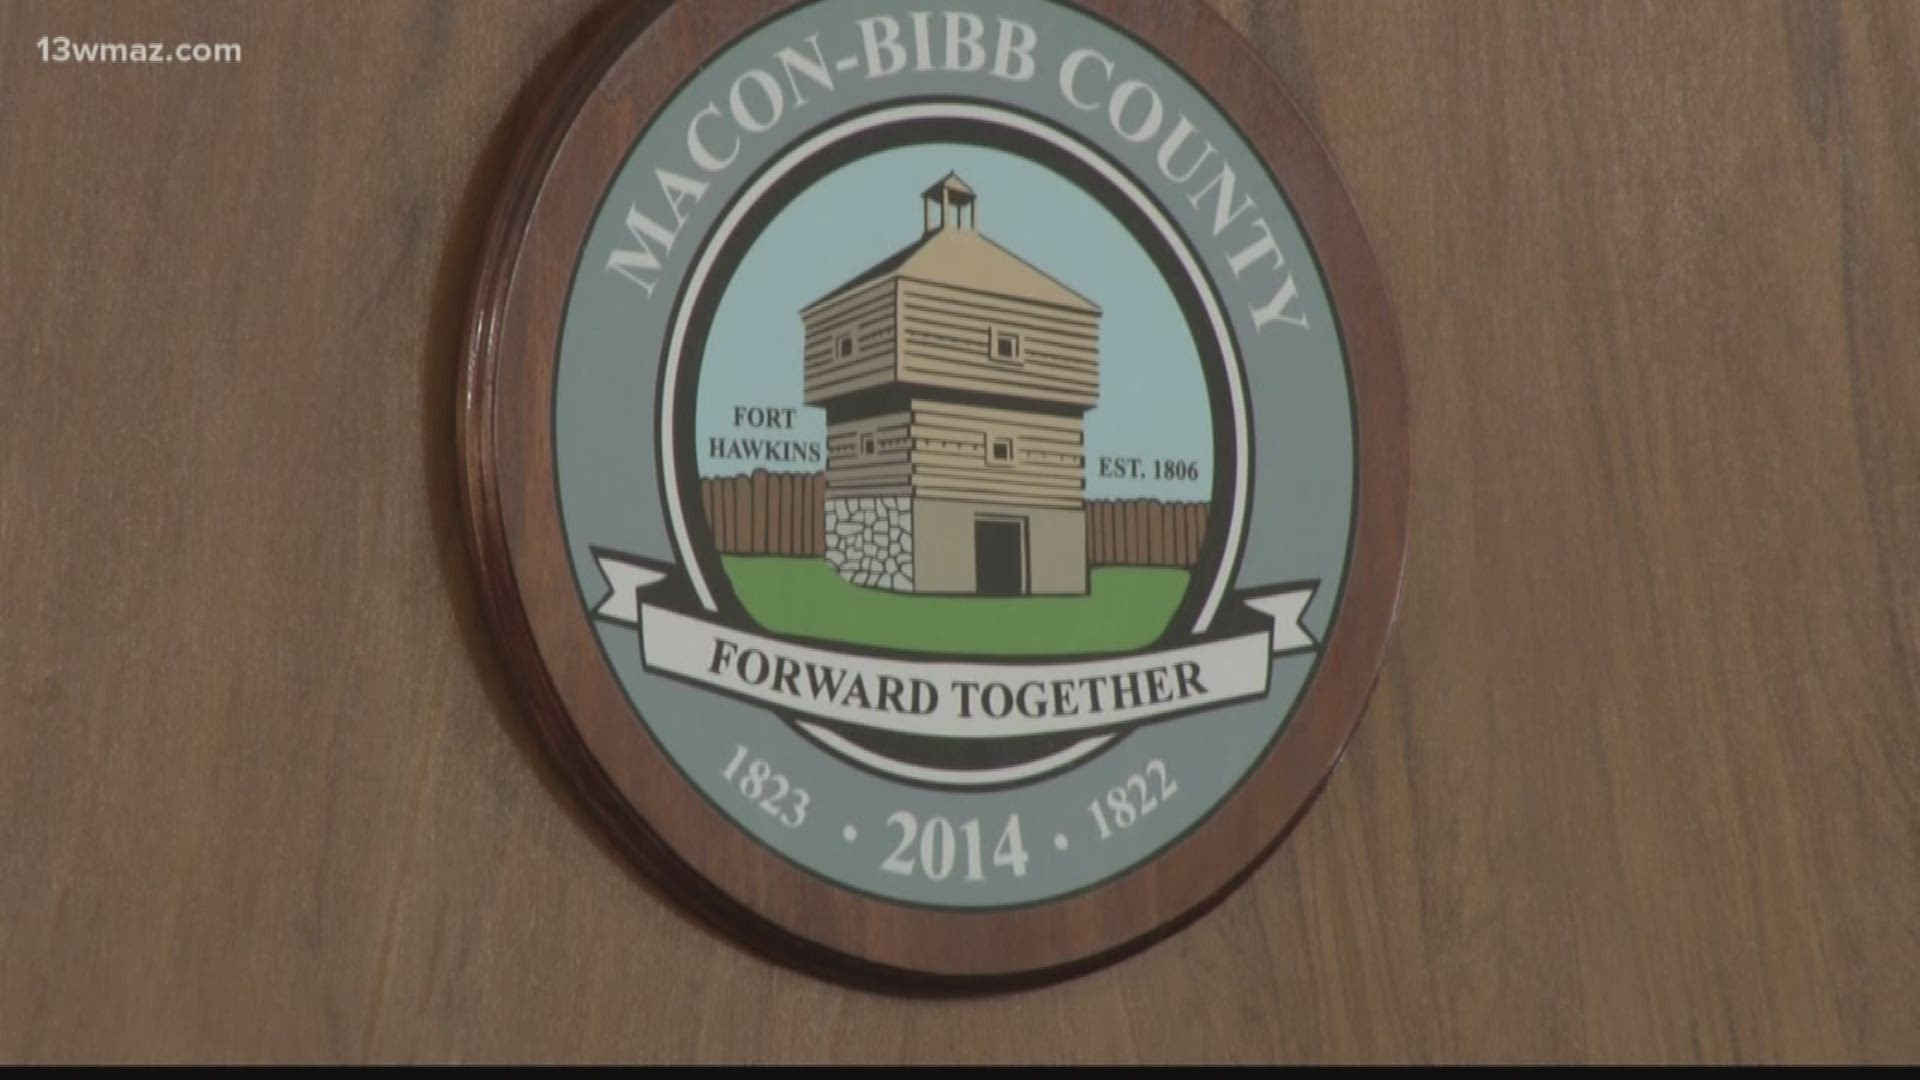 Bibb County is gearing up for another budget year. A new audit says it's in  much better shape than it was 3 years ago.